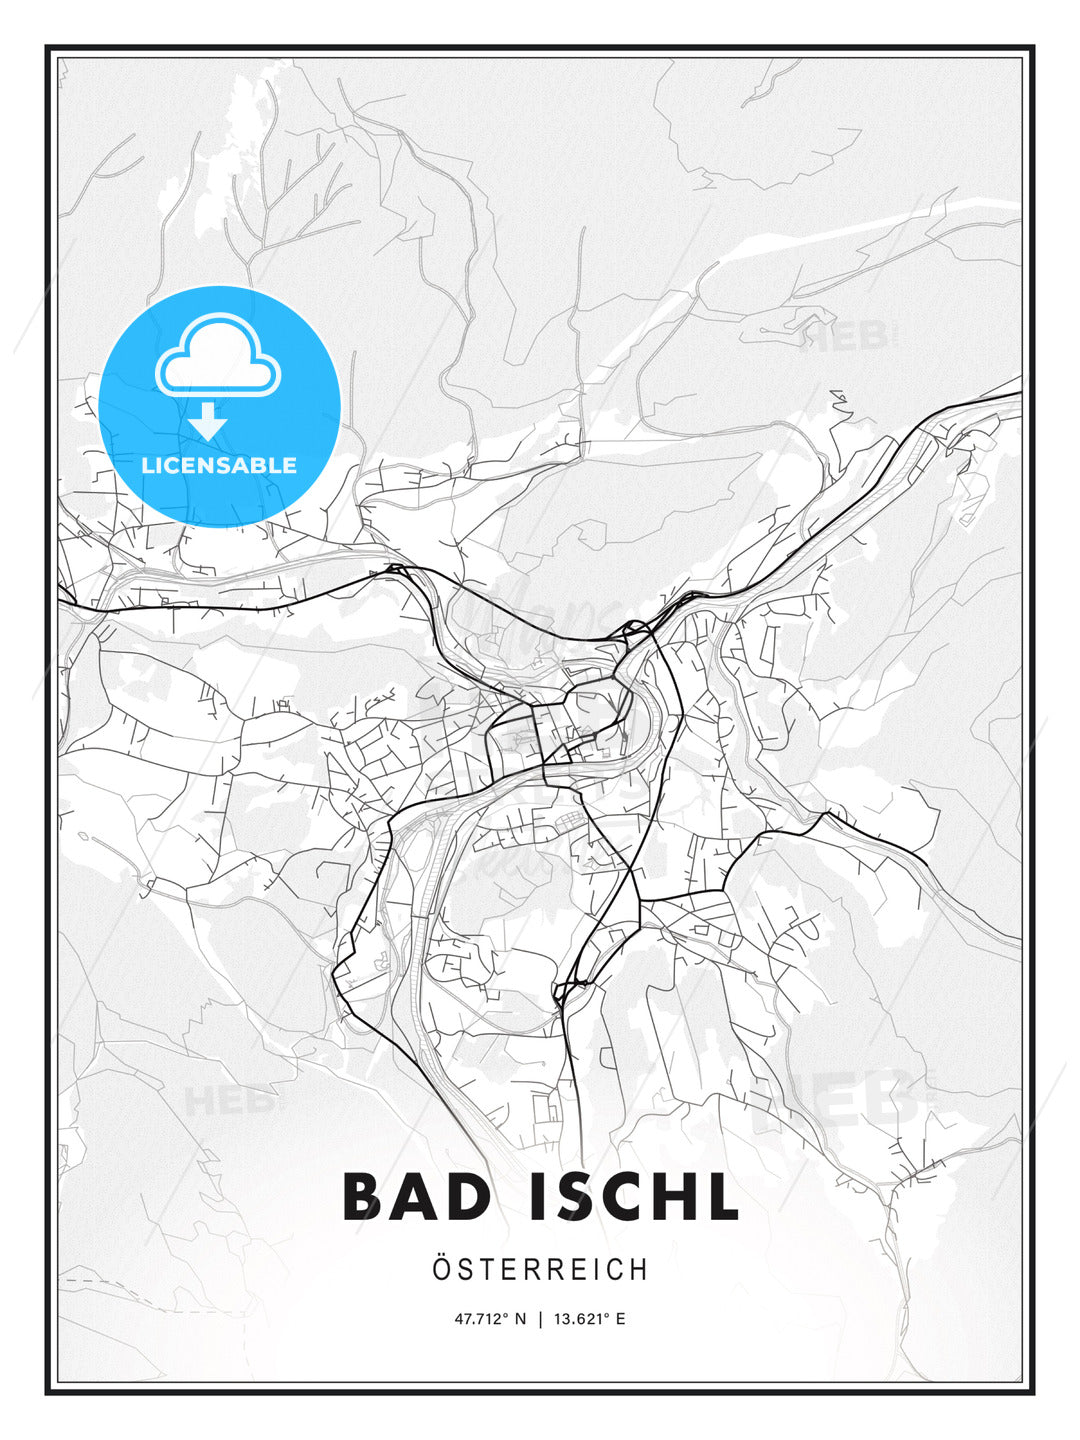 Bad Ischl, Austria, Modern Print Template in Various Formats - HEBSTREITS Sketches